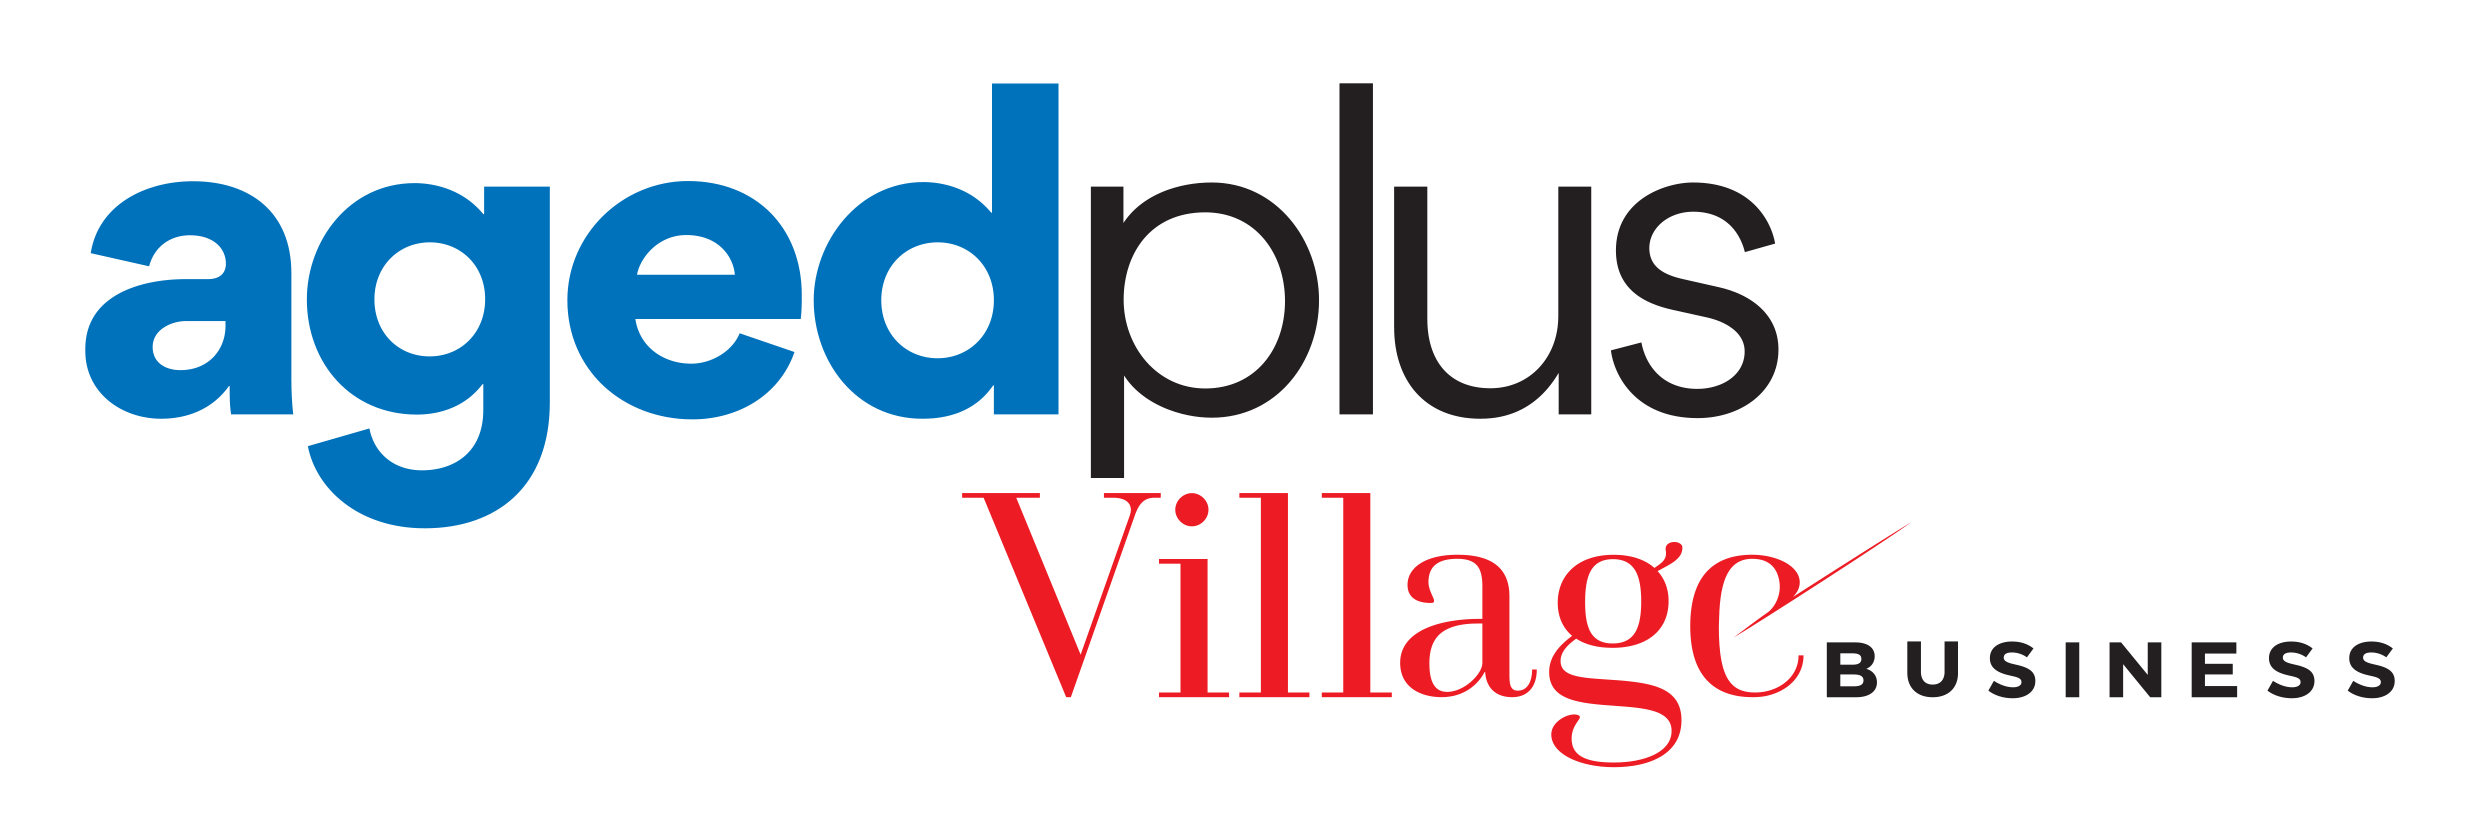 AgedPlus Village Business - The Business of Aged Care & Retirement